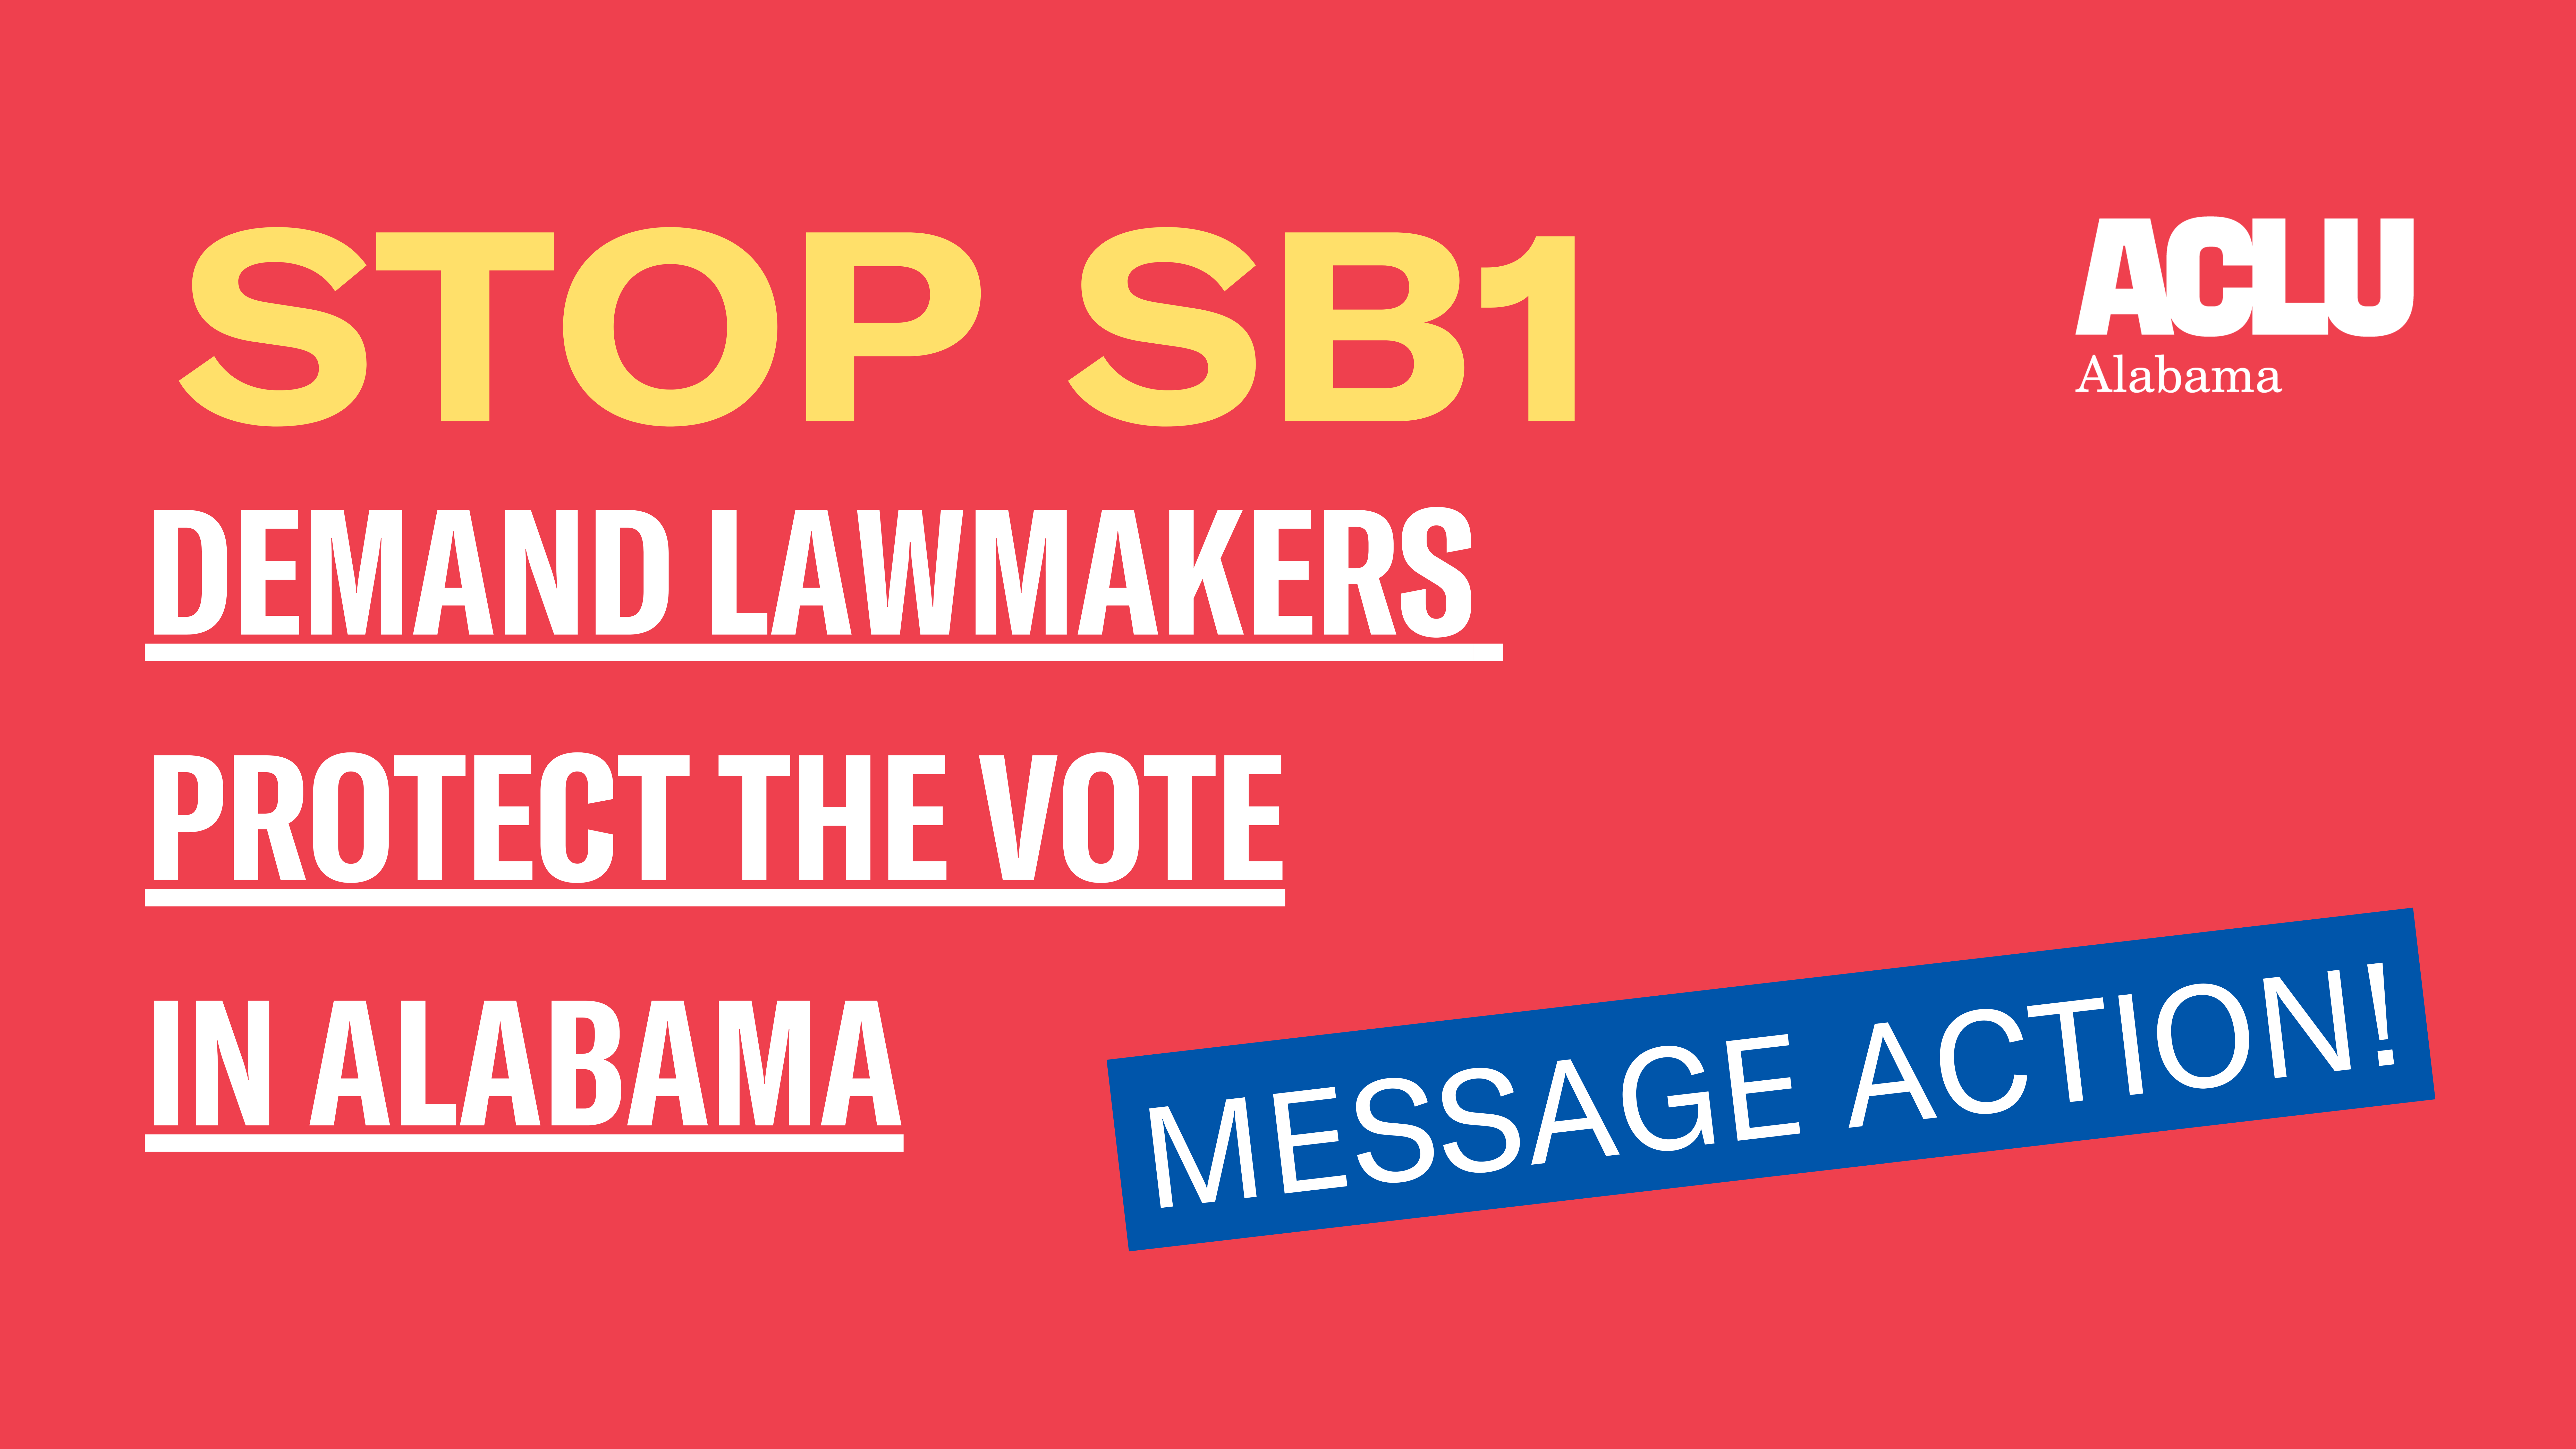 STOP SB1: DEMAND LAWMAKERS  PROTECT THE VOTE IN ALABAMA